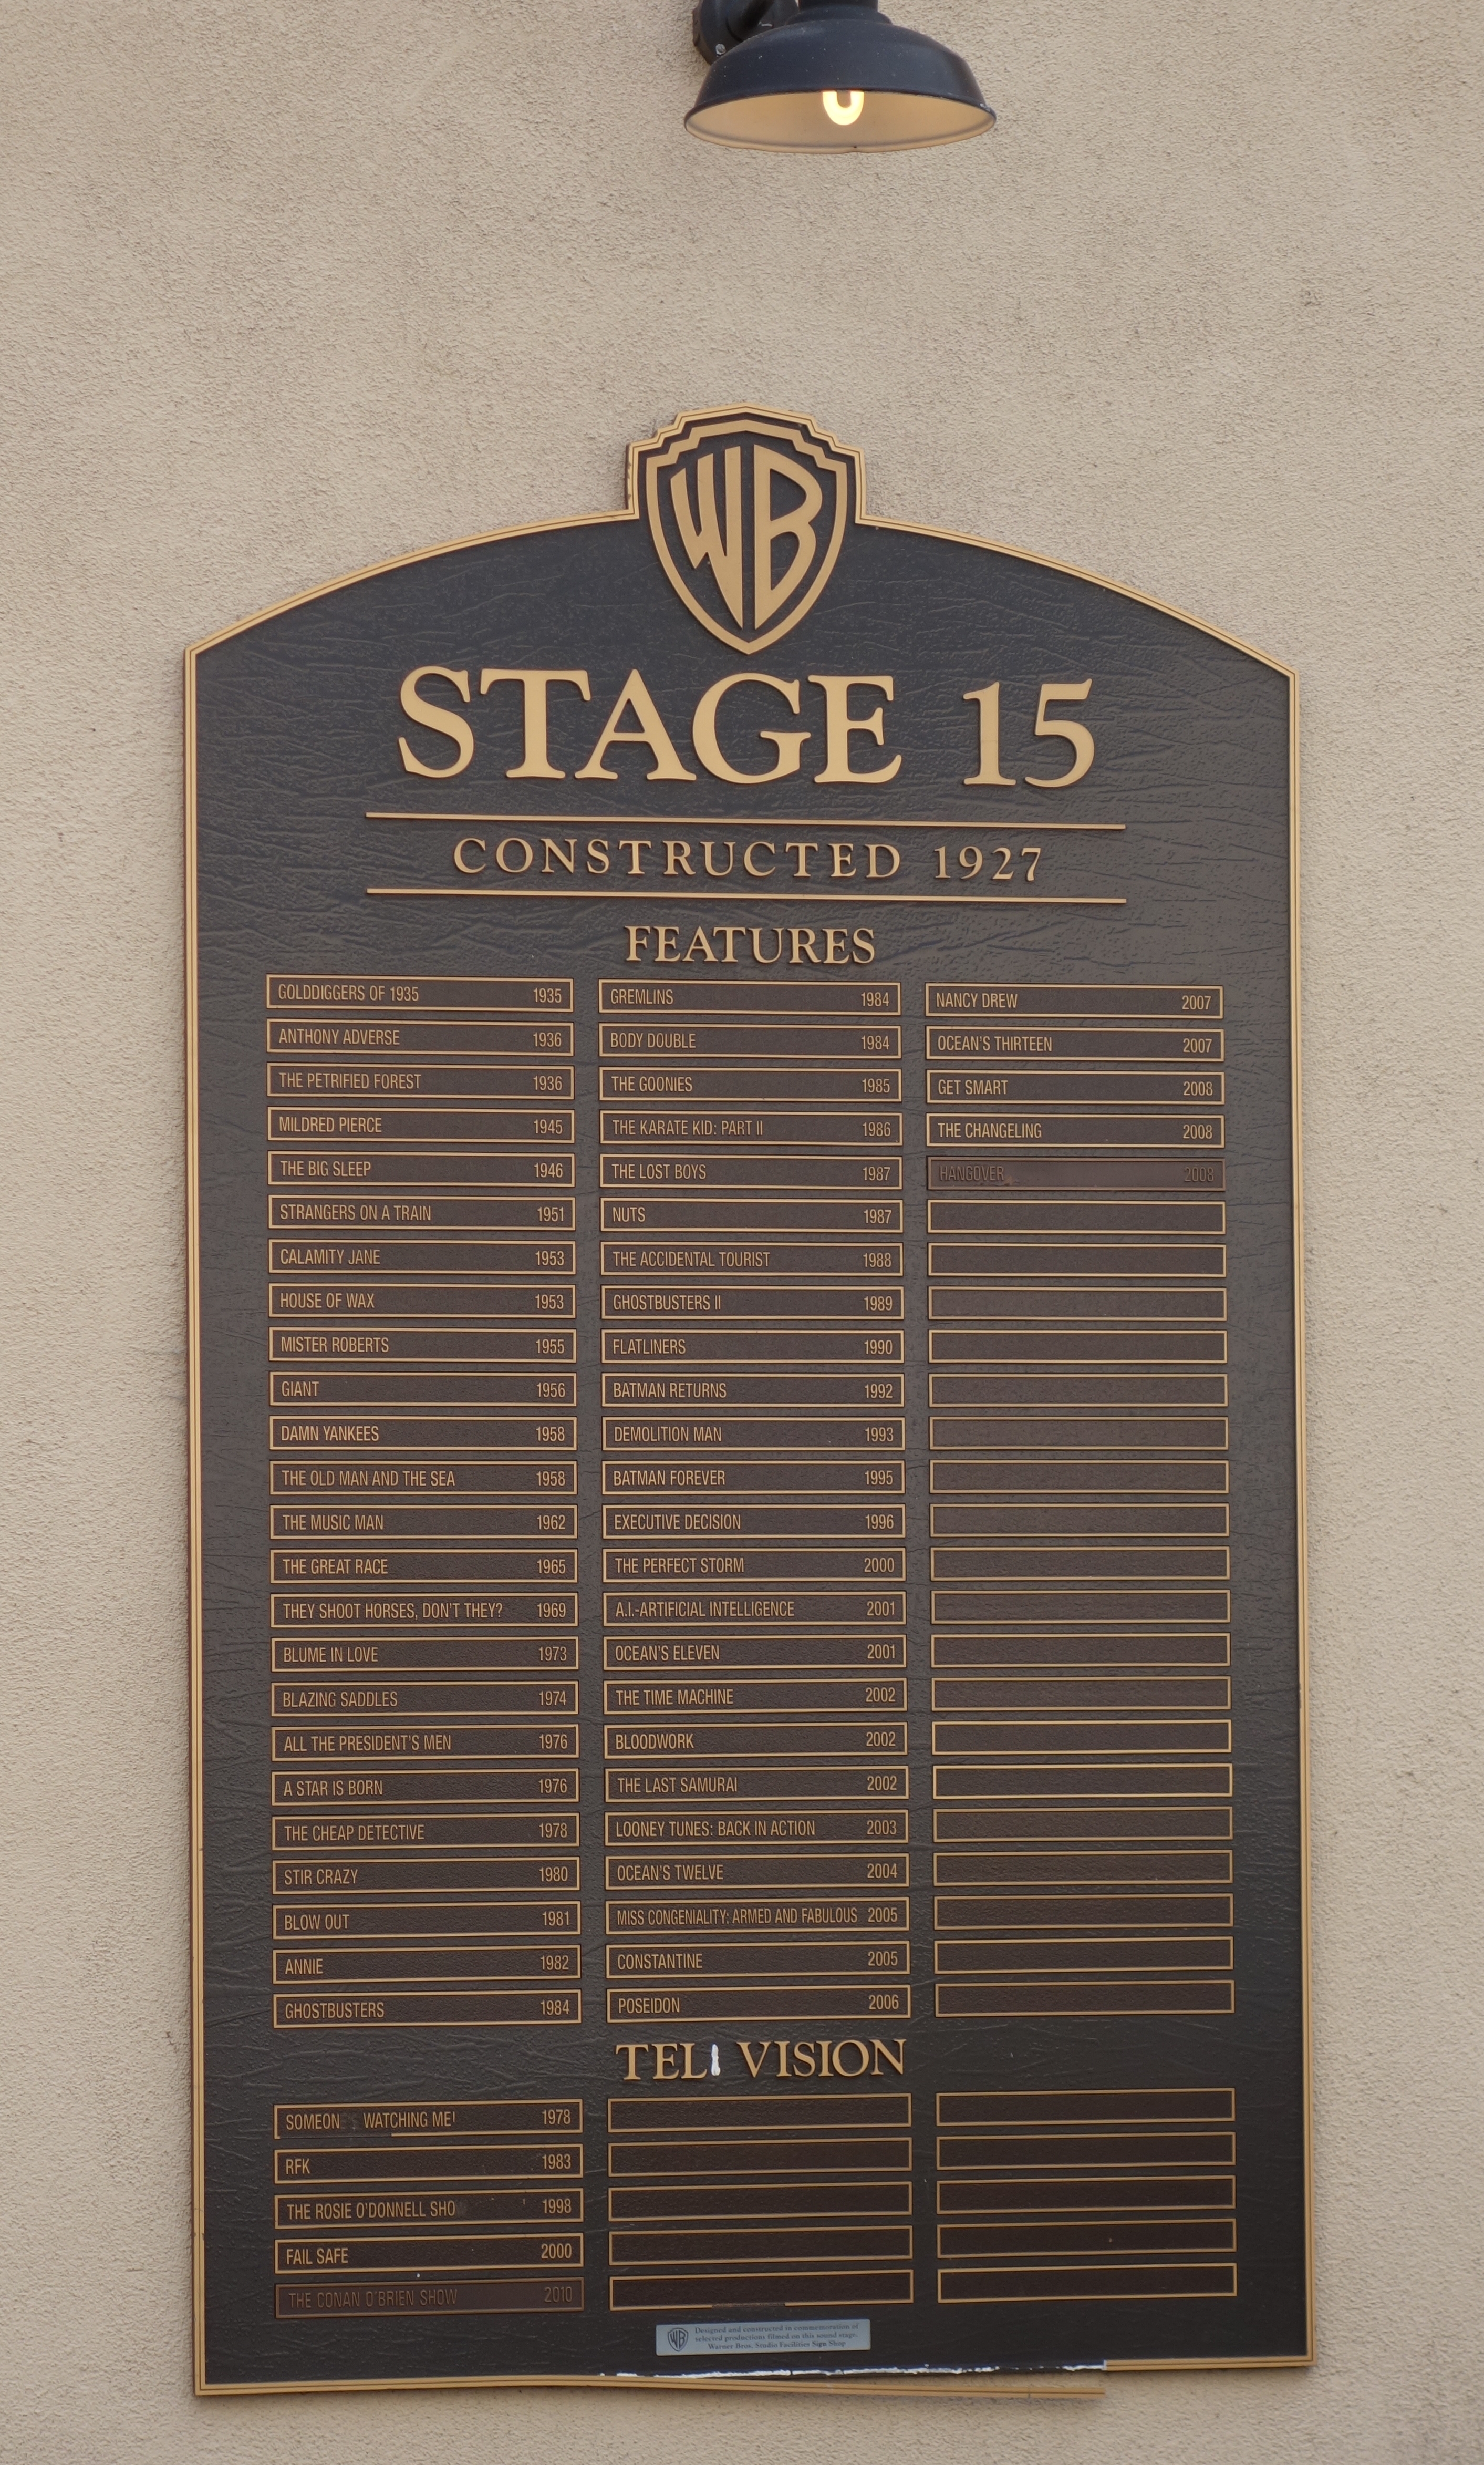 WB Stage 15